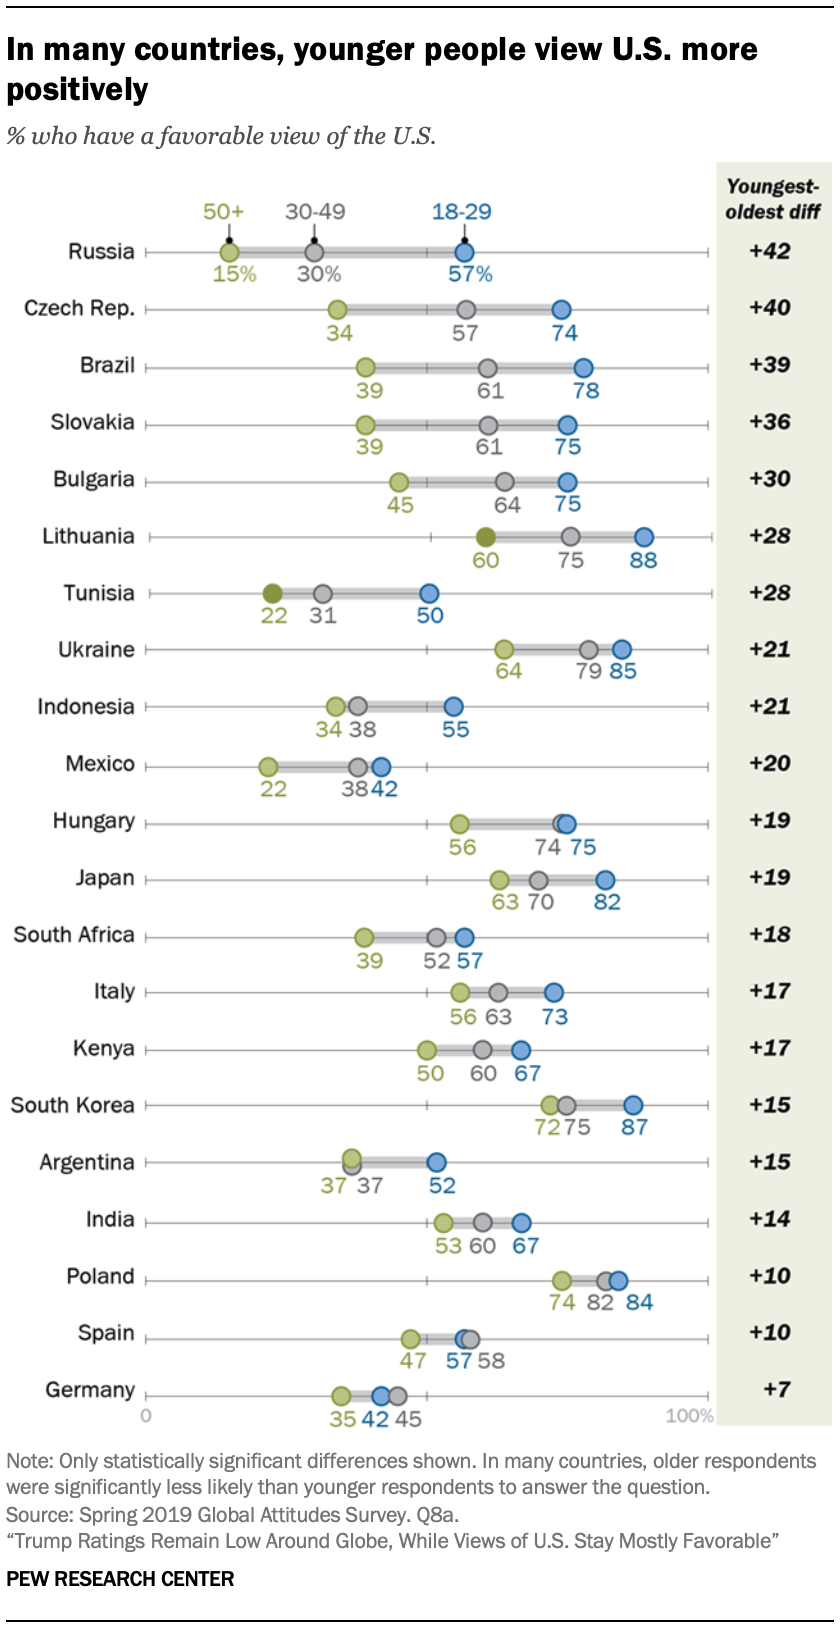 Those on the political right view U.S. more favorably than those on the left in many countries 